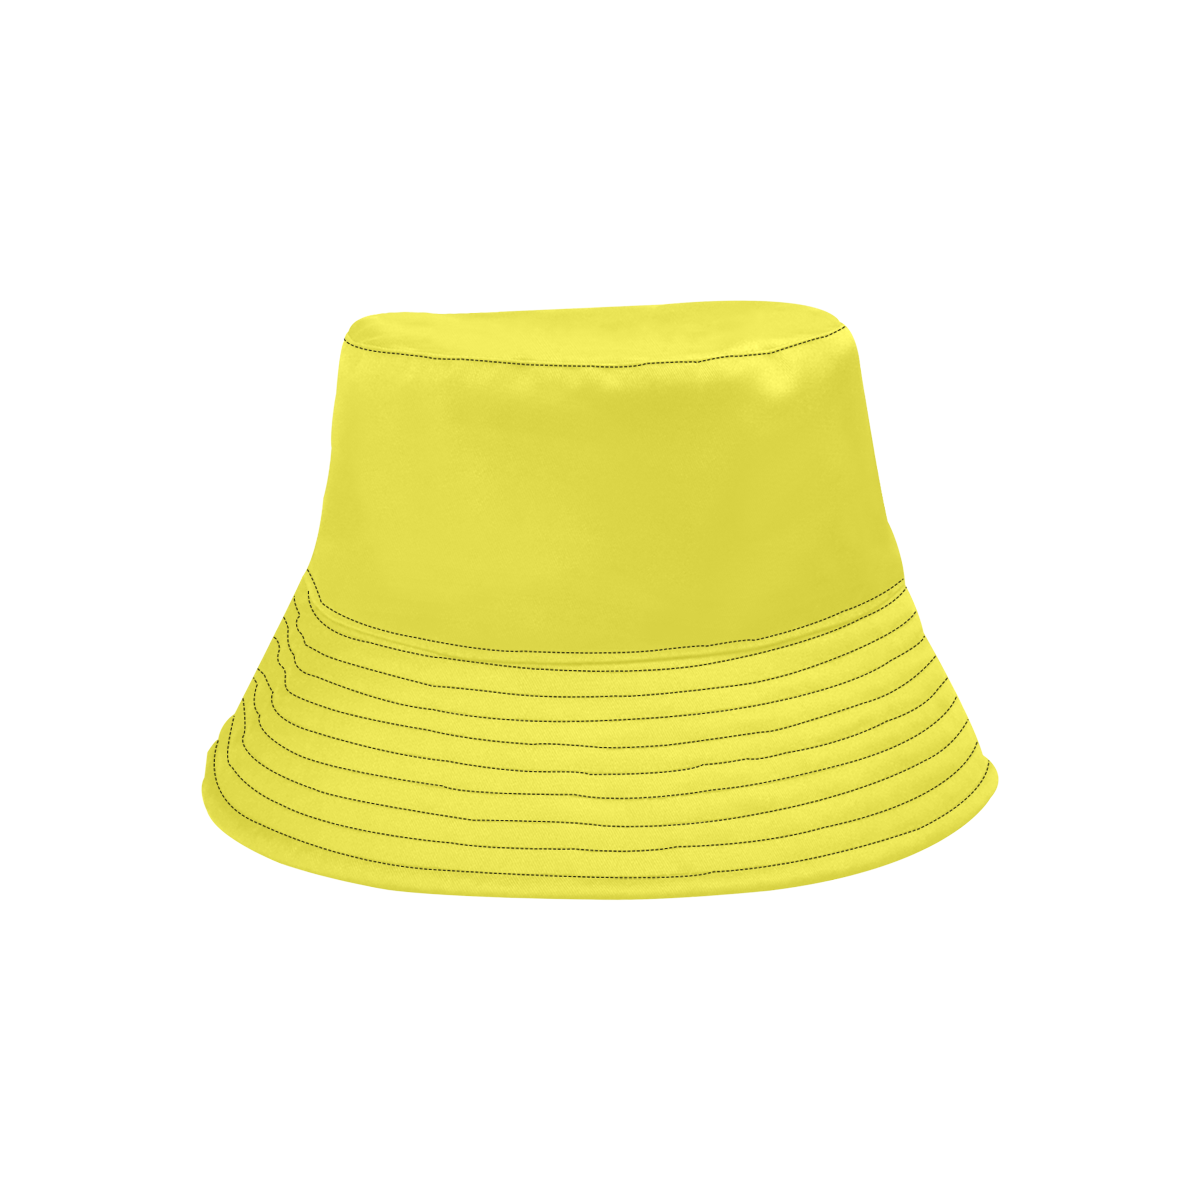 Yummy Lily Yellow Solid Color All Over Print Bucket Hat